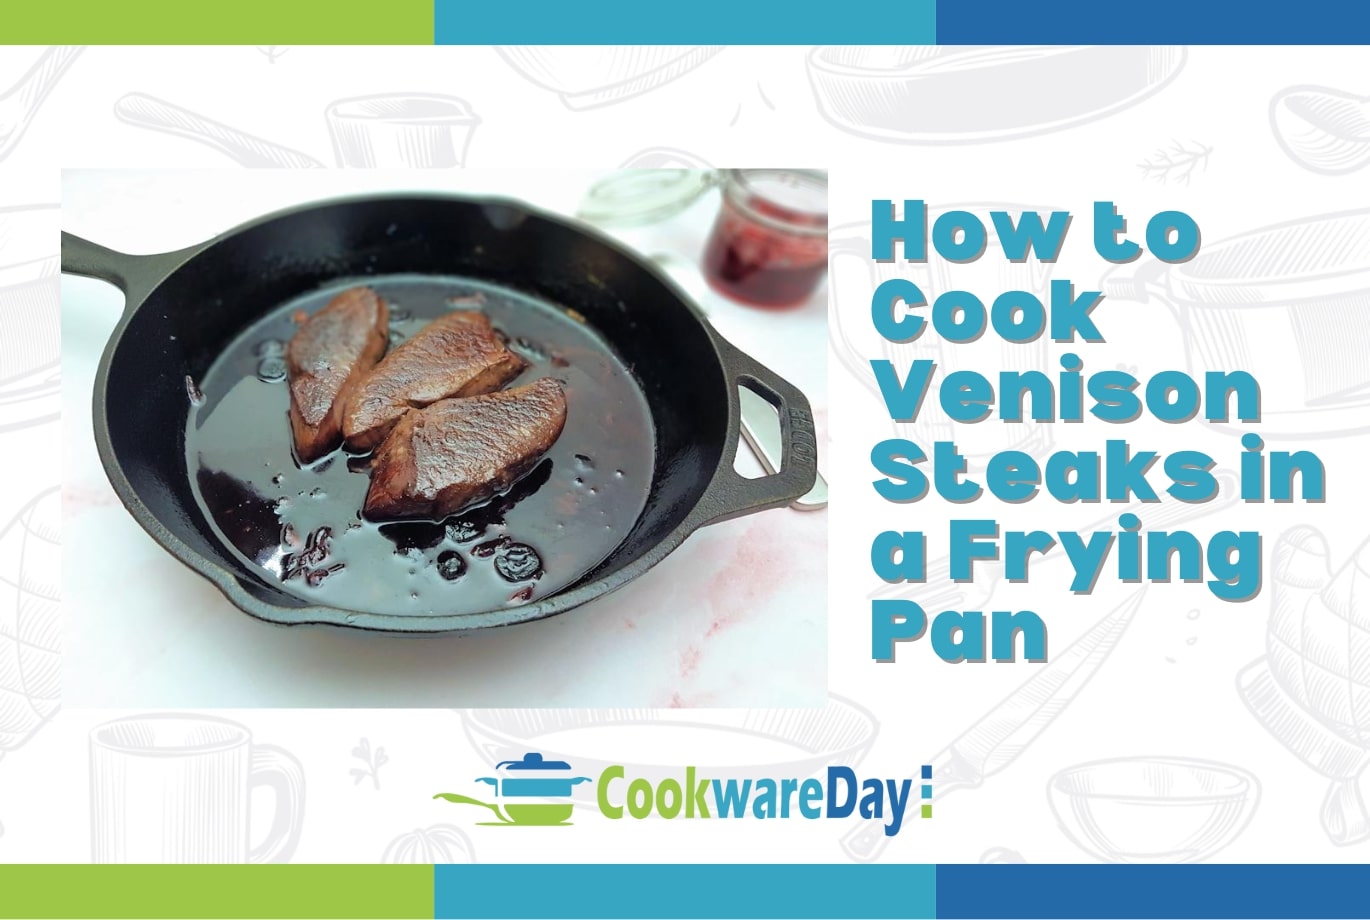 How to Cook Venison Steaks in a Frying Pan